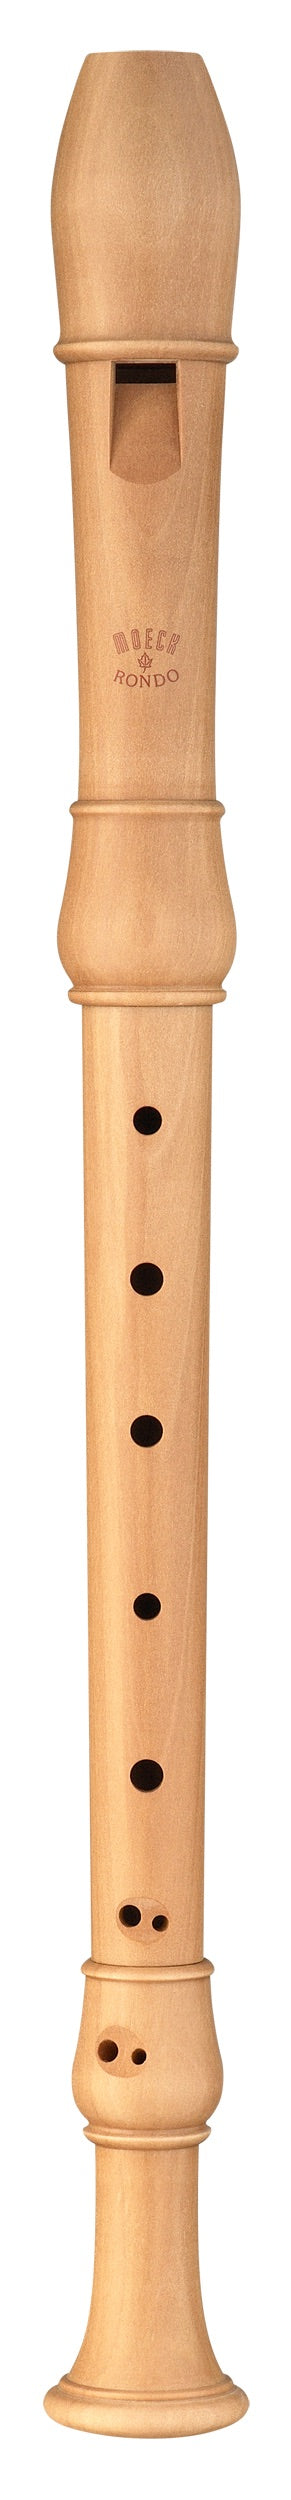 MOE2302 Moeck Flauto Rondo Alto Recorder in Pearwood at Early Music Shop